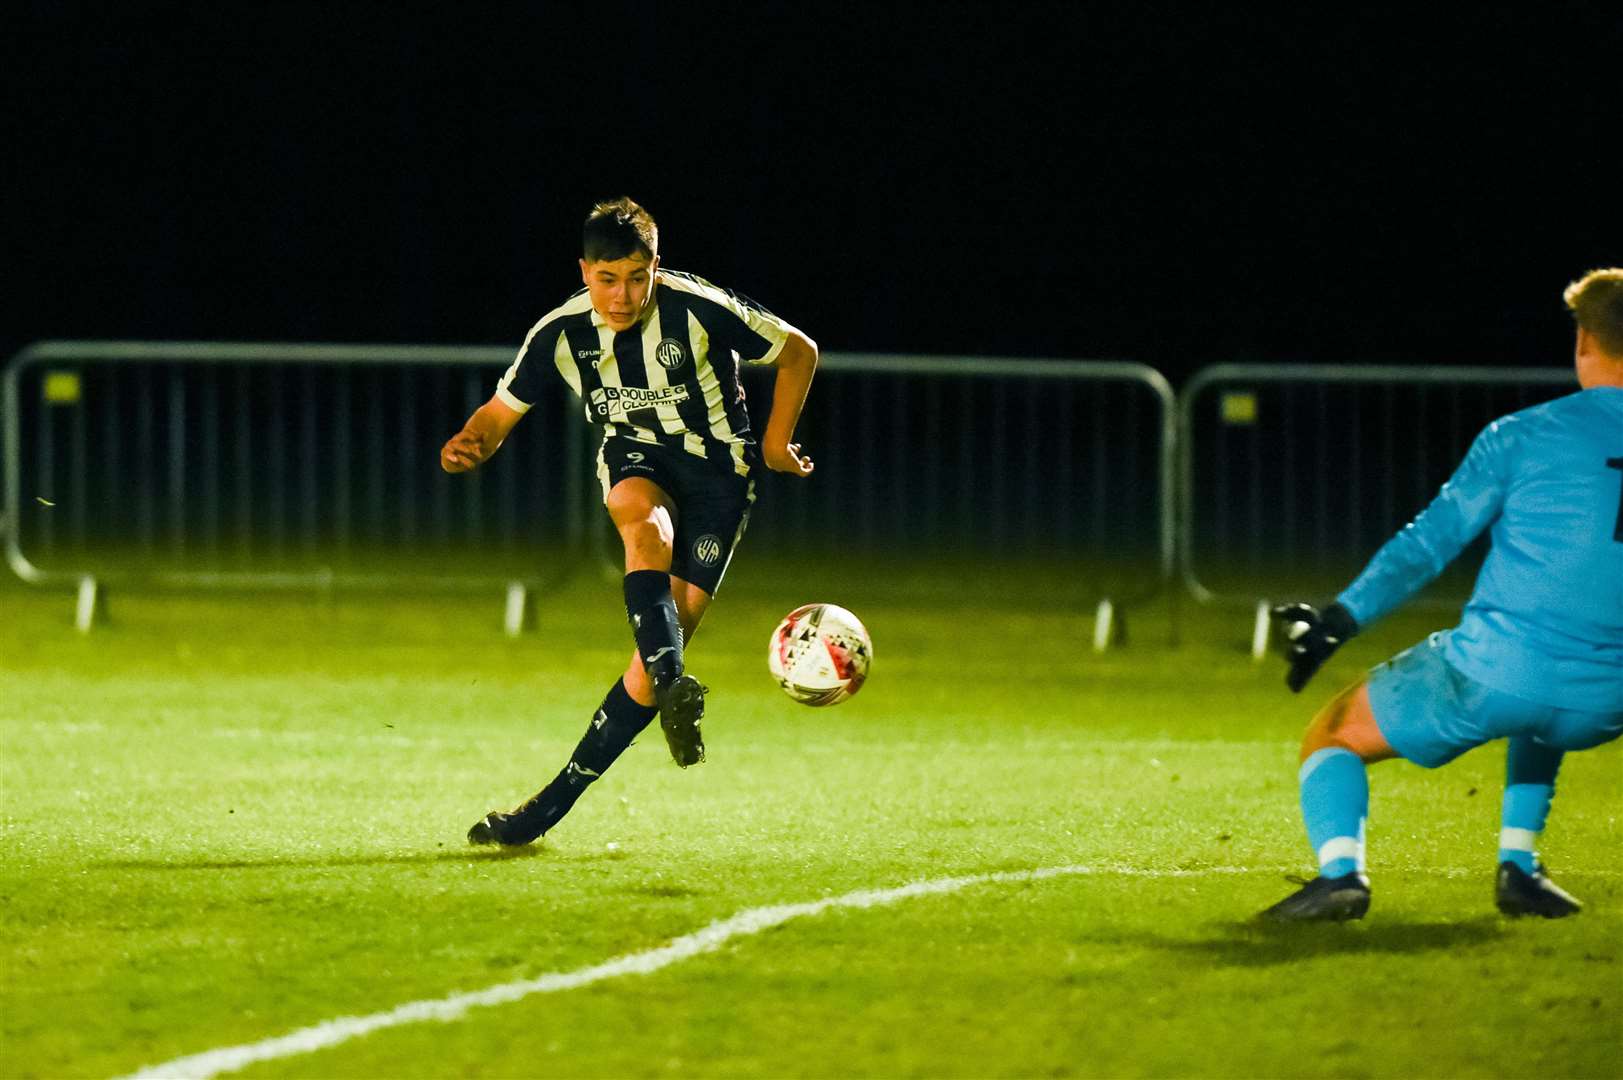 Fletcher Toll was on target twice in Heacham's 3-0 victory against Holbeach United last night. (62649242)